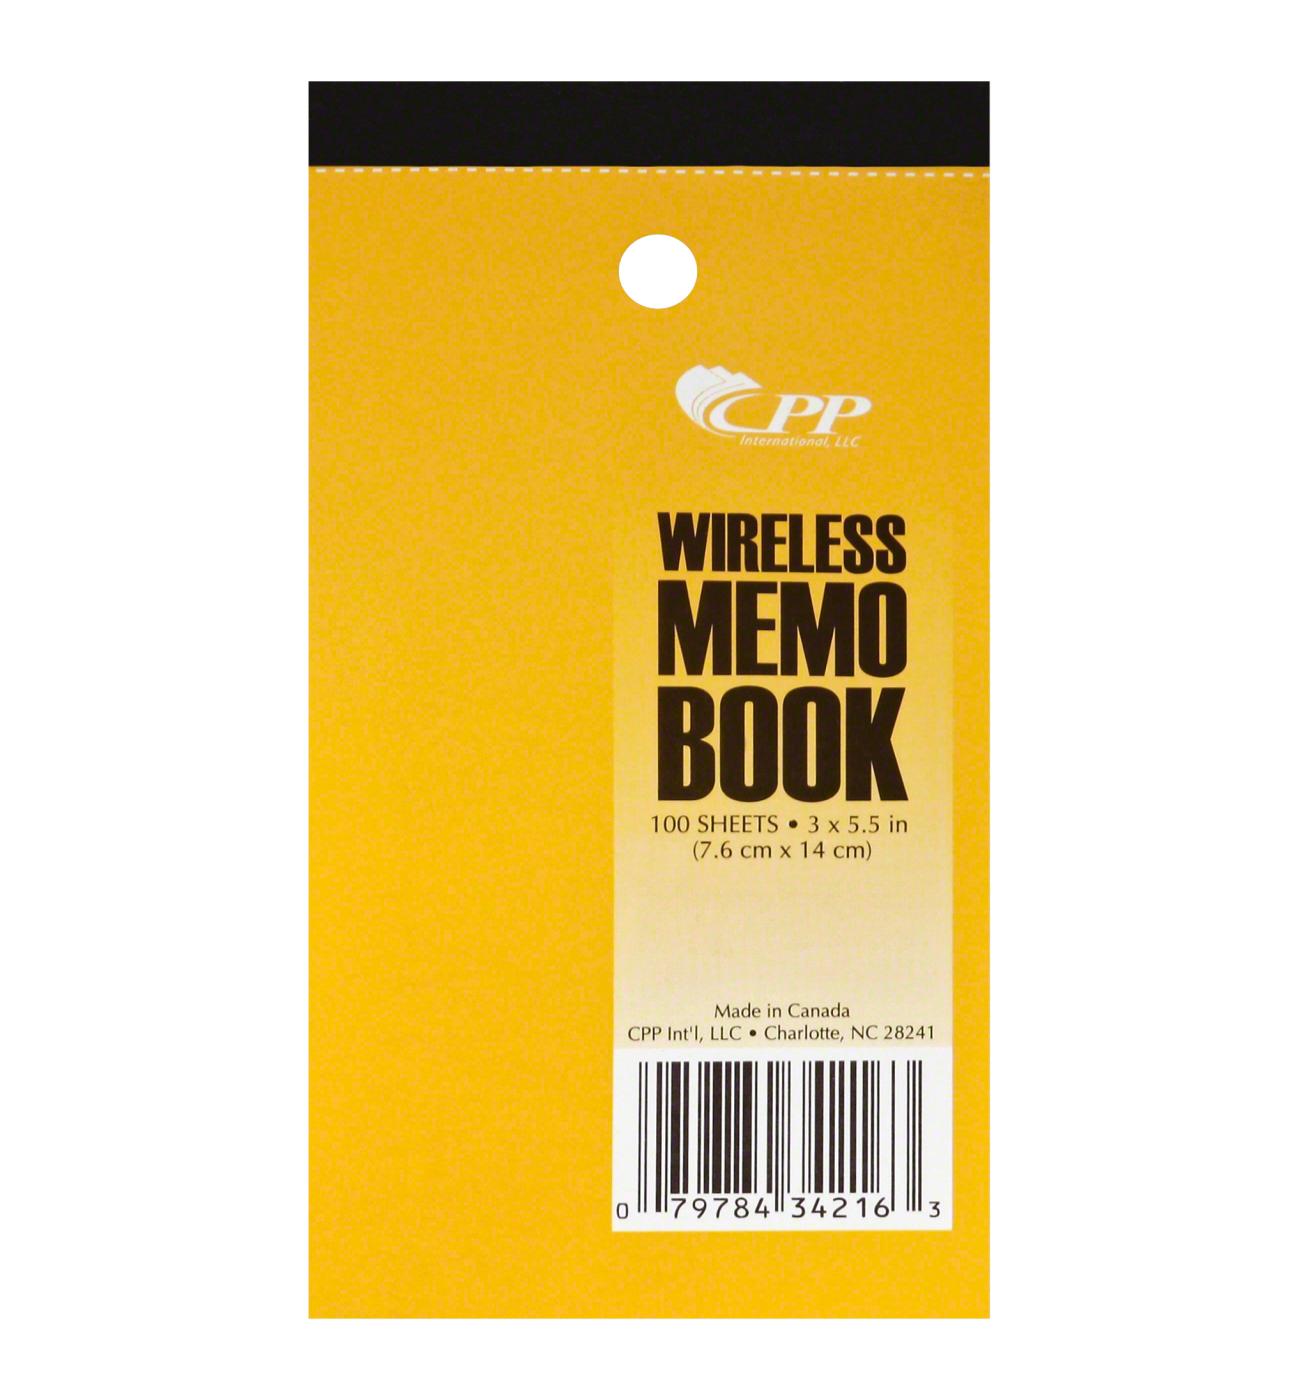 CPP International 3" x 5" Wireless Memo Book, Colors May Vary; image 2 of 3